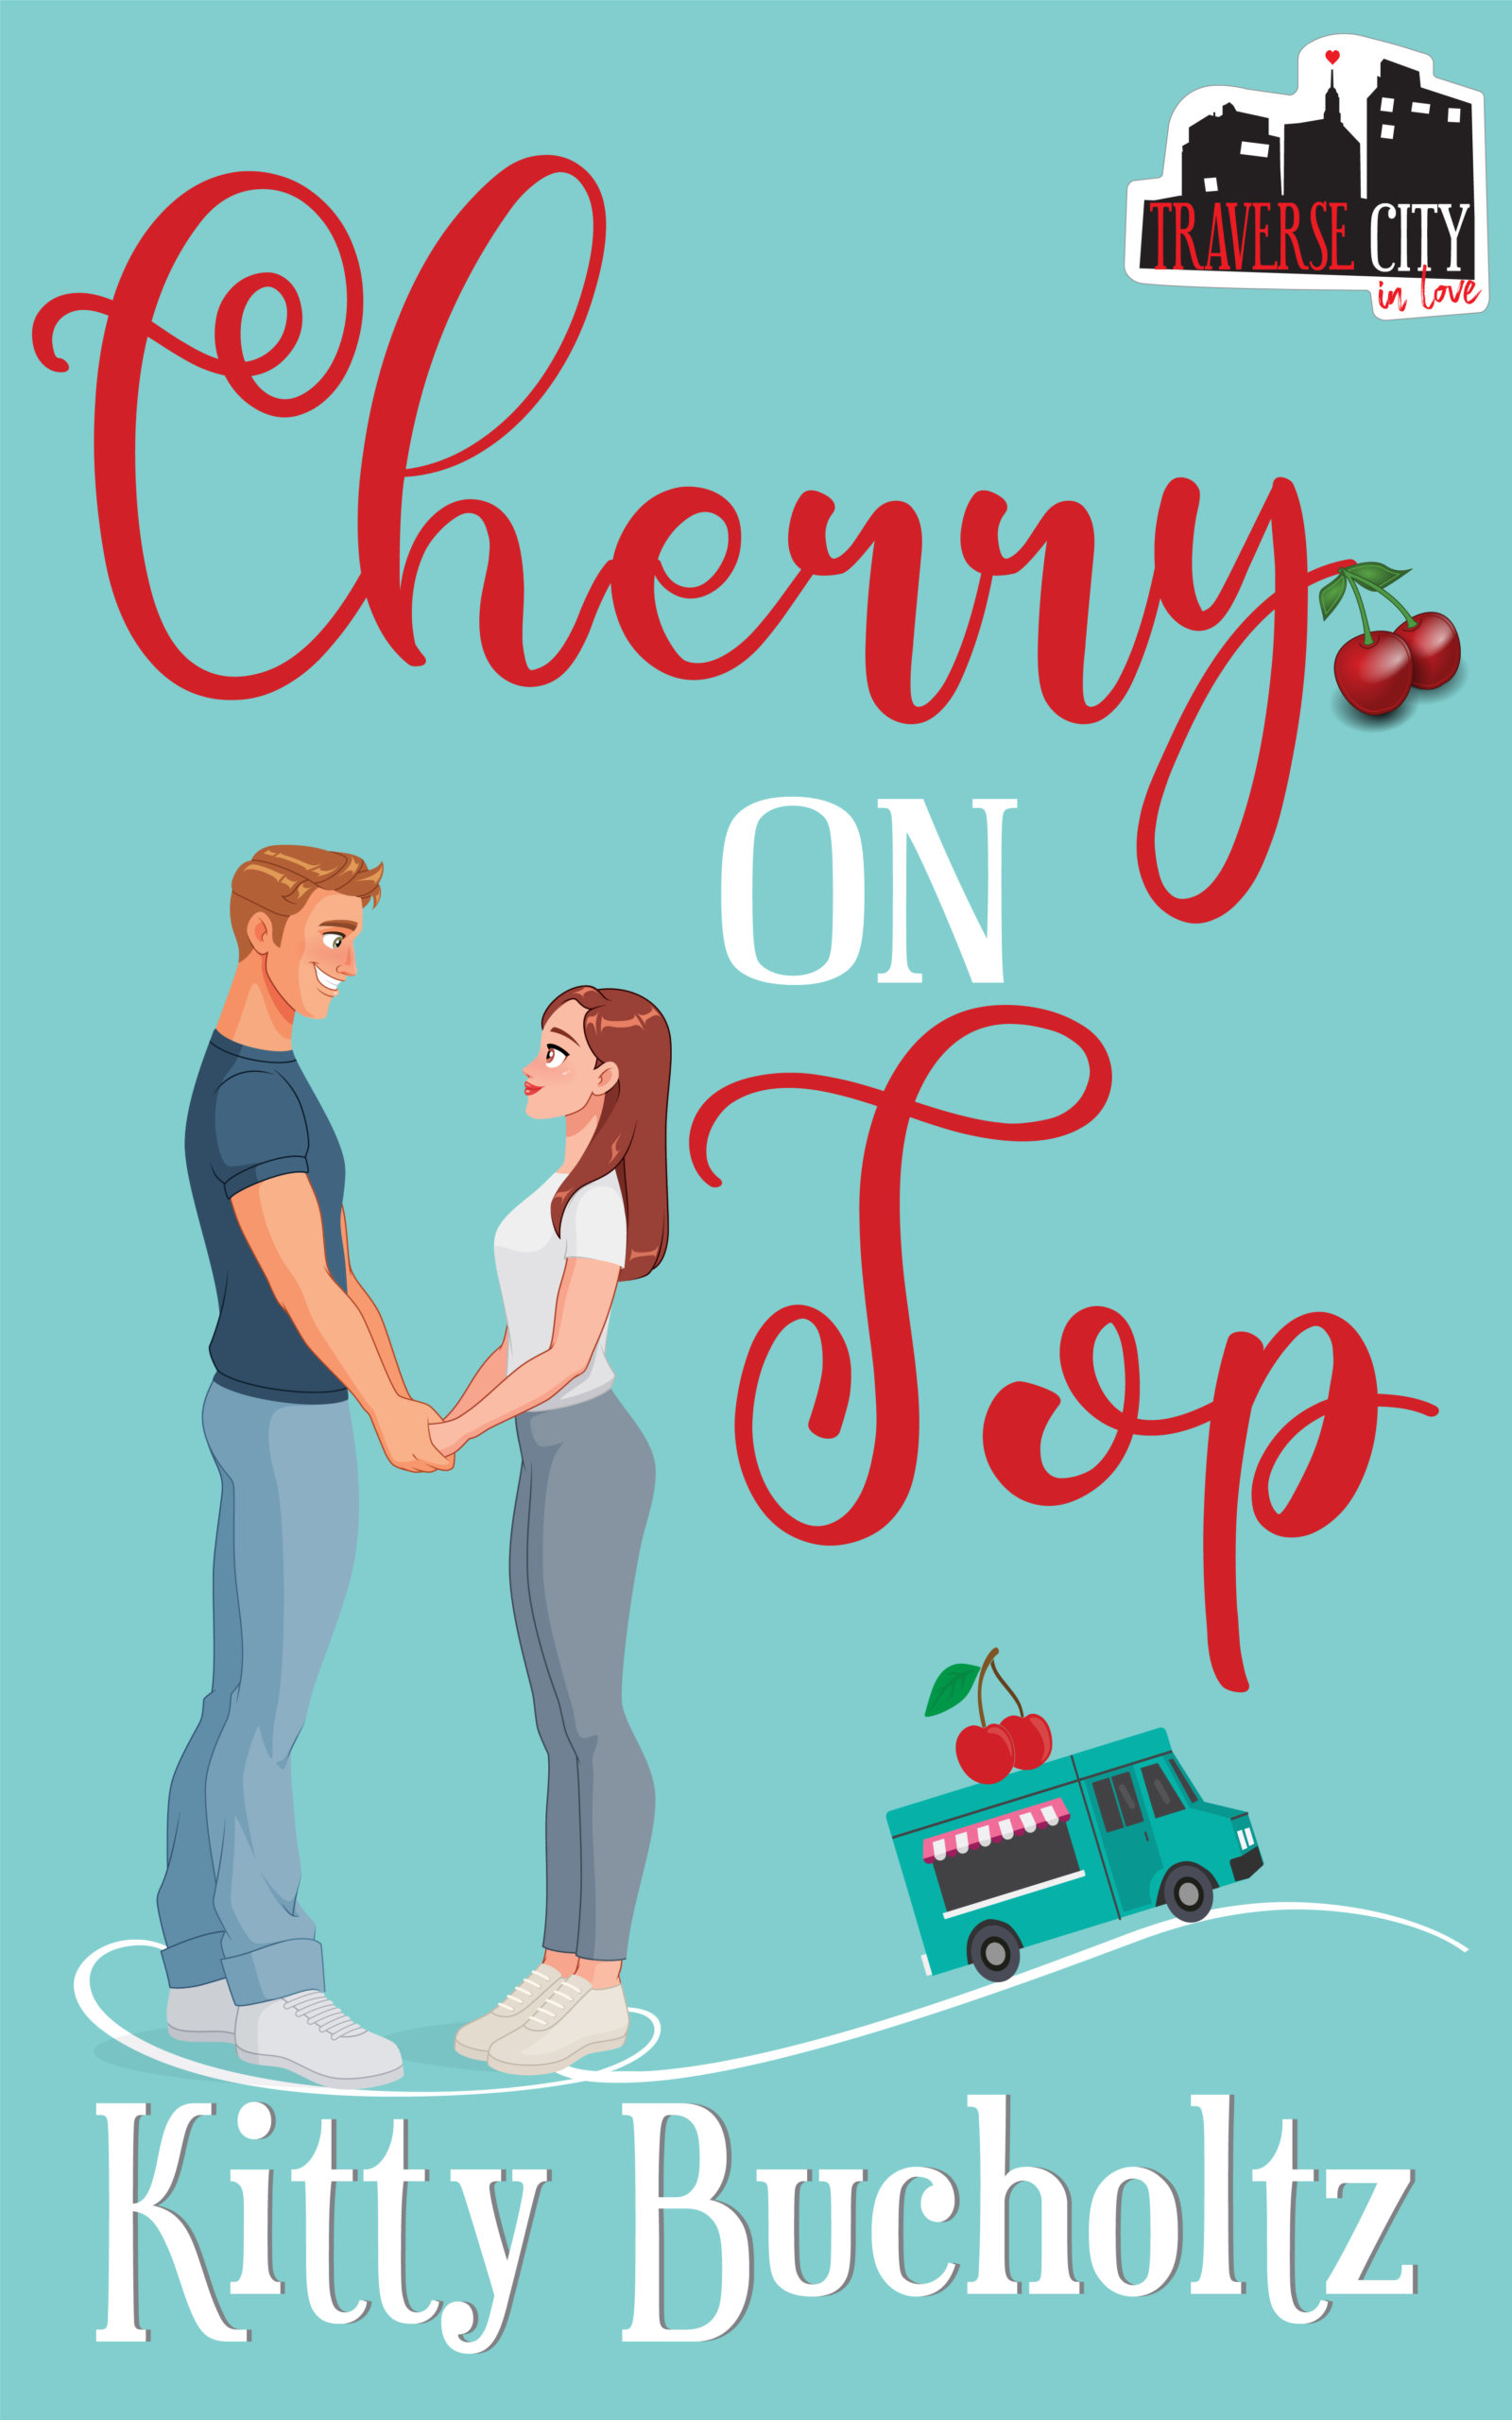 Ebook Cover - Cherry On Top by Kitty Bucholtz